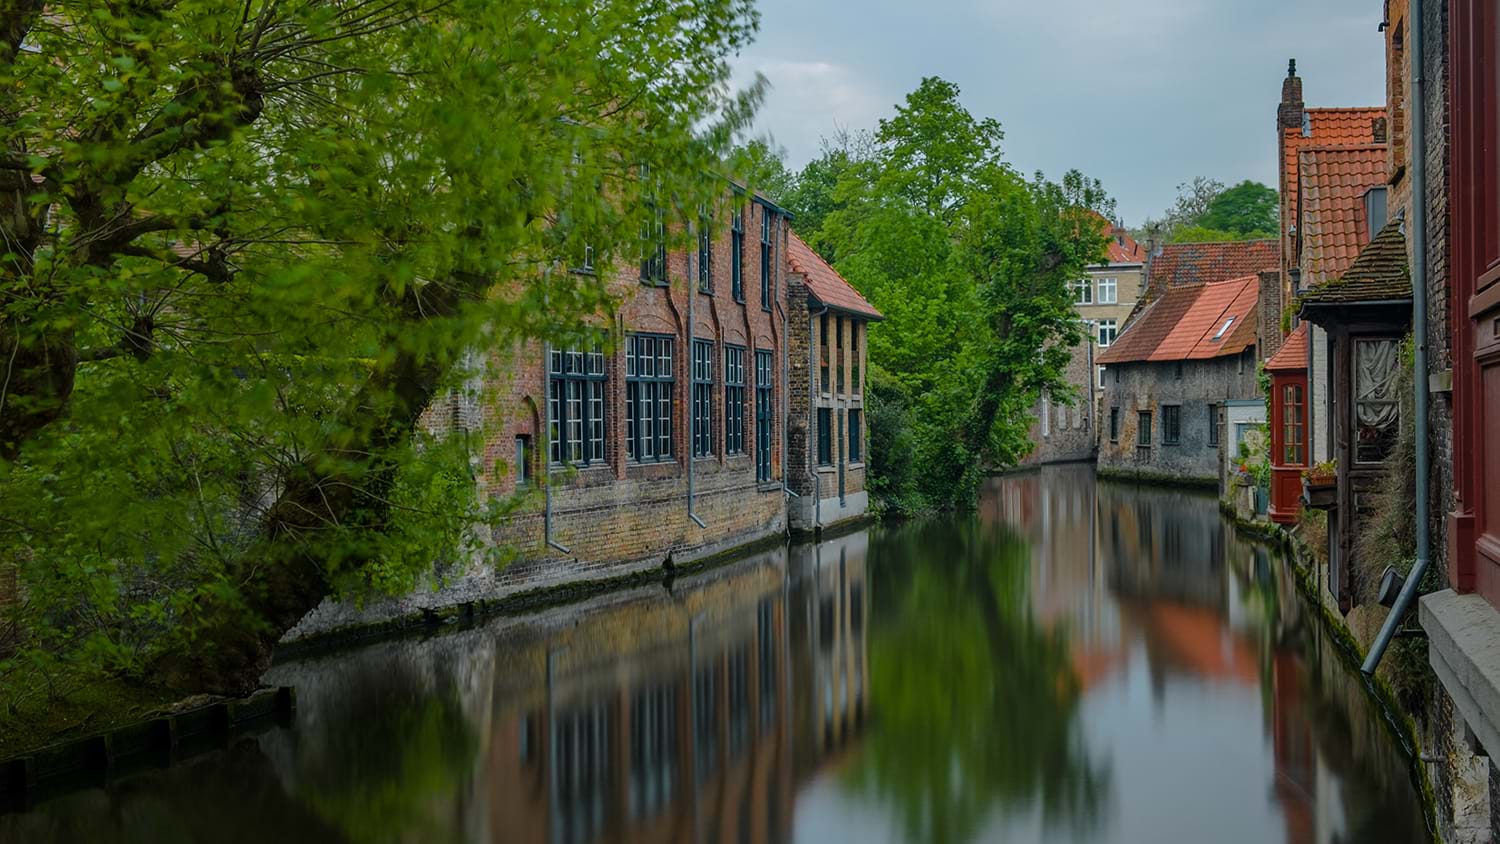 Calm canal between houses in town